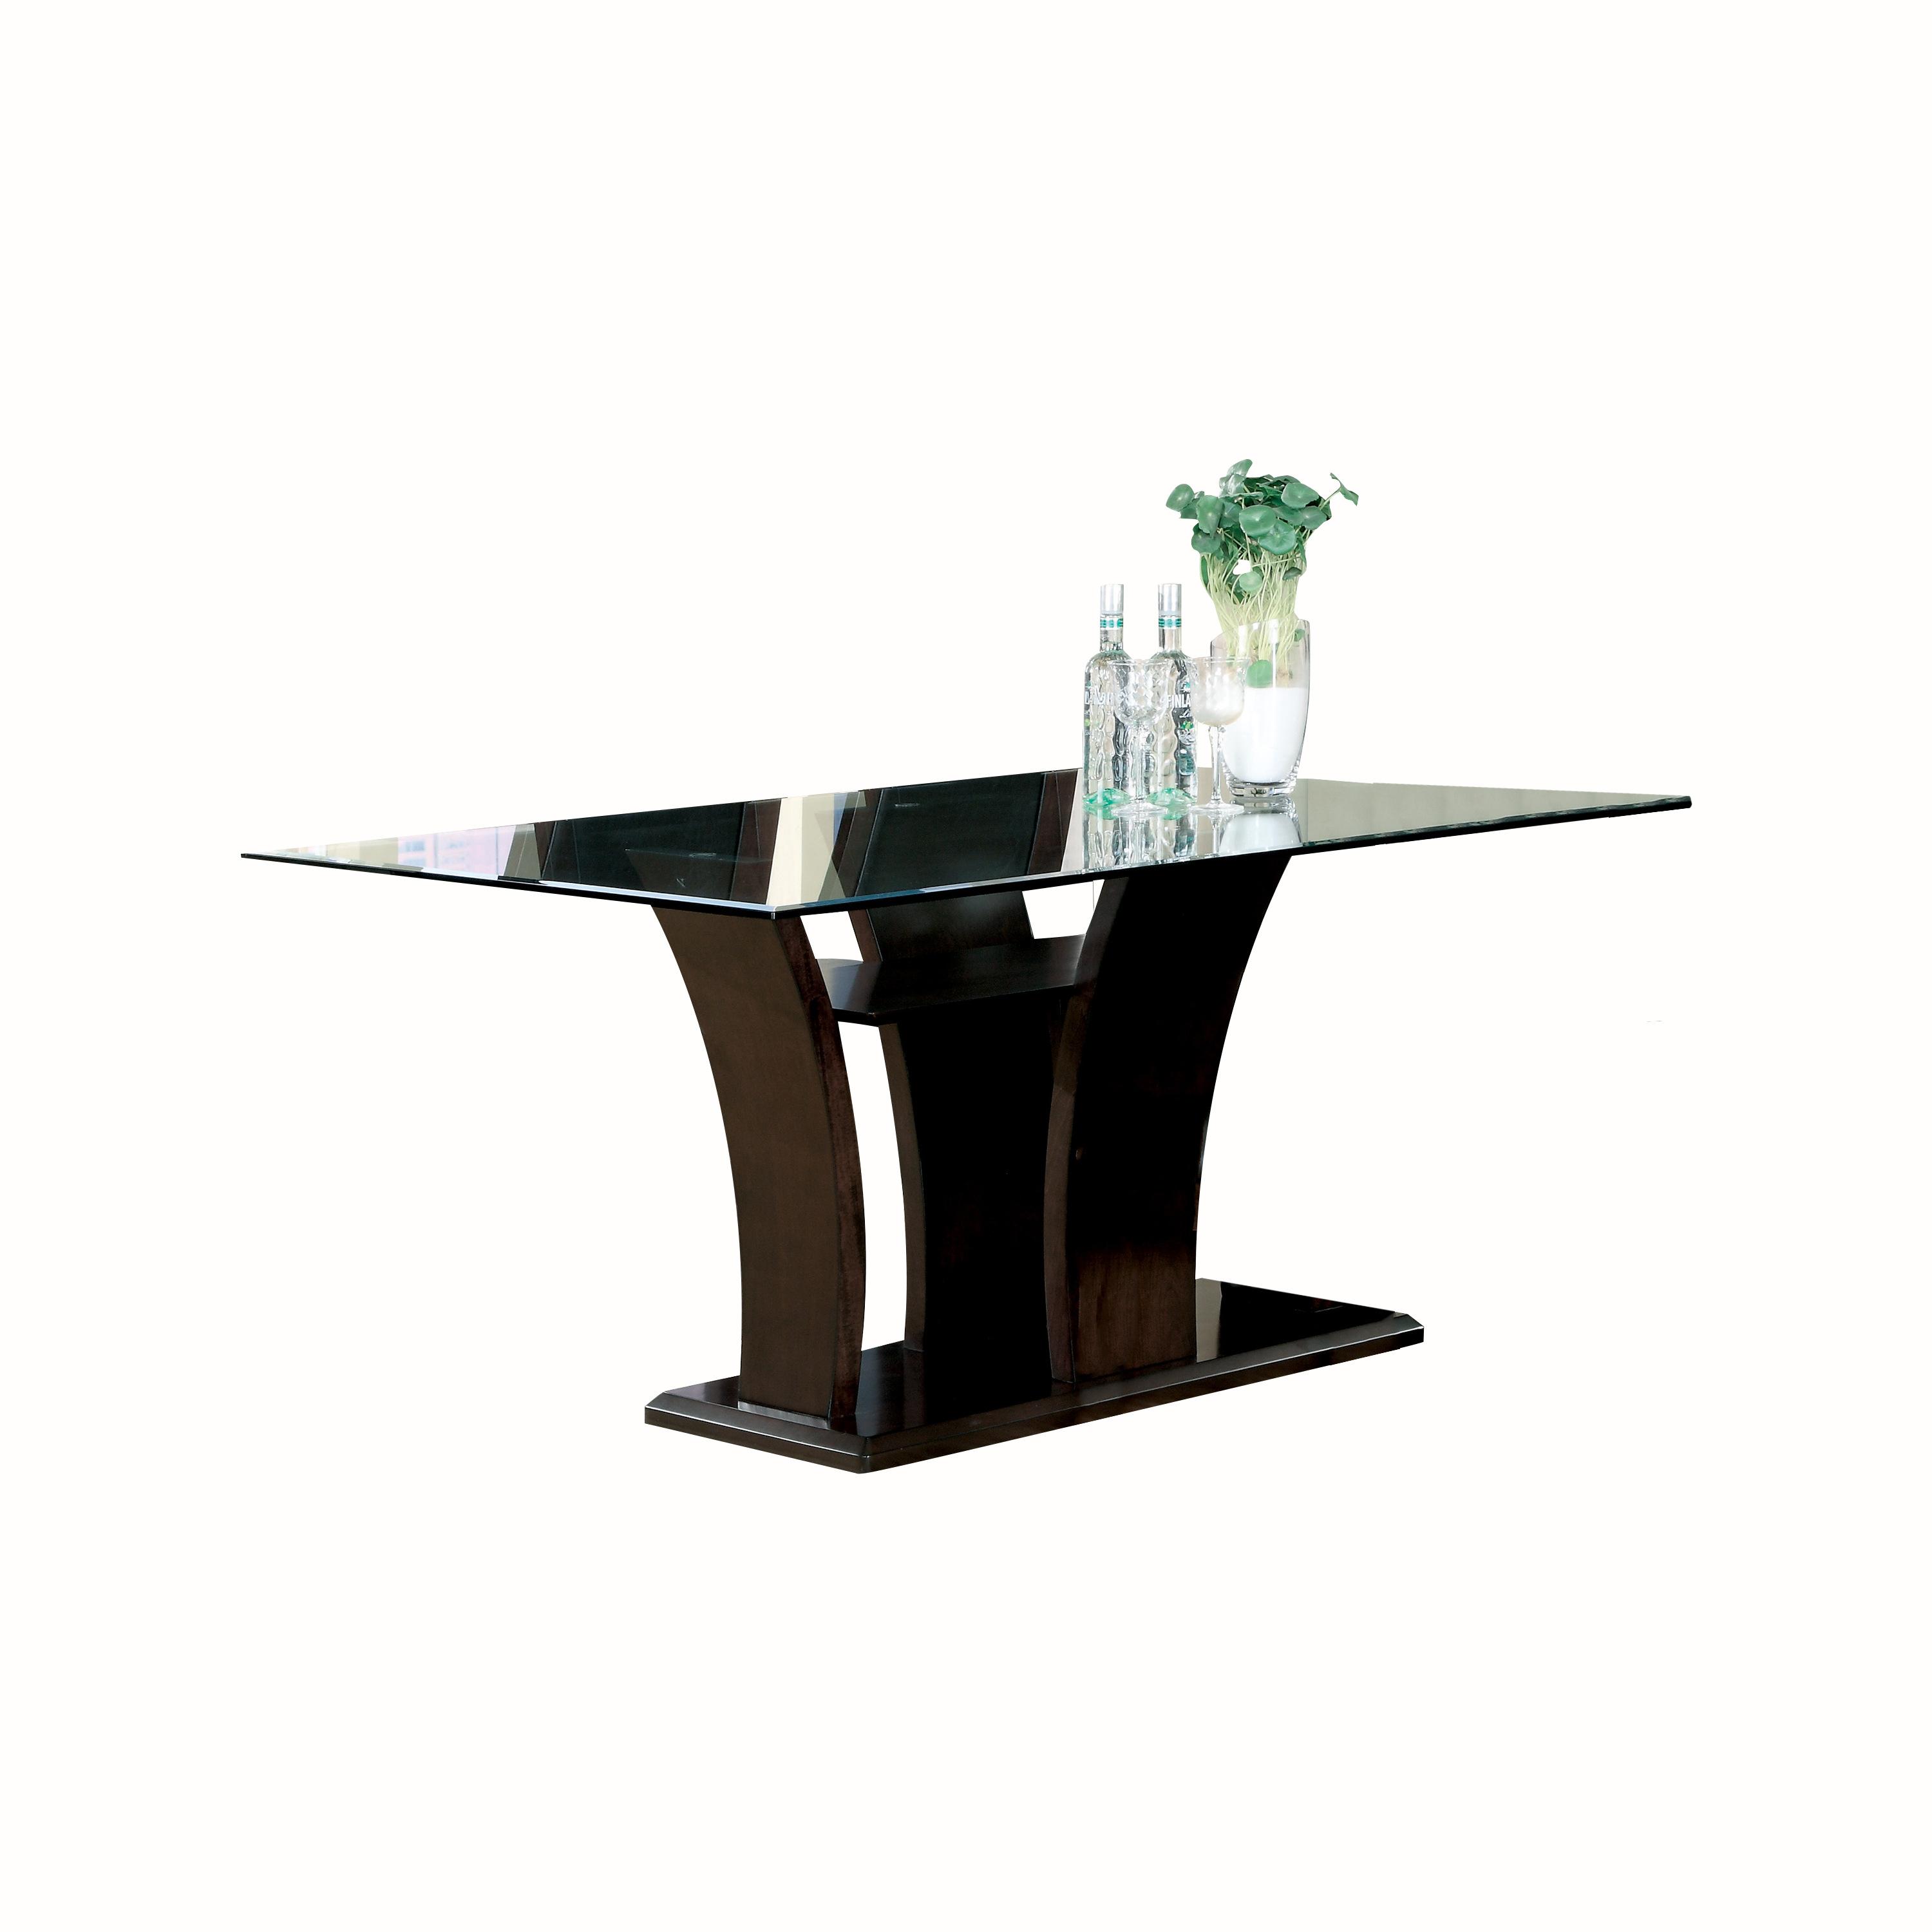 

    
Contemporary Espresso Tempered Glass Dining Table Homelegance 710-71* Daisy
